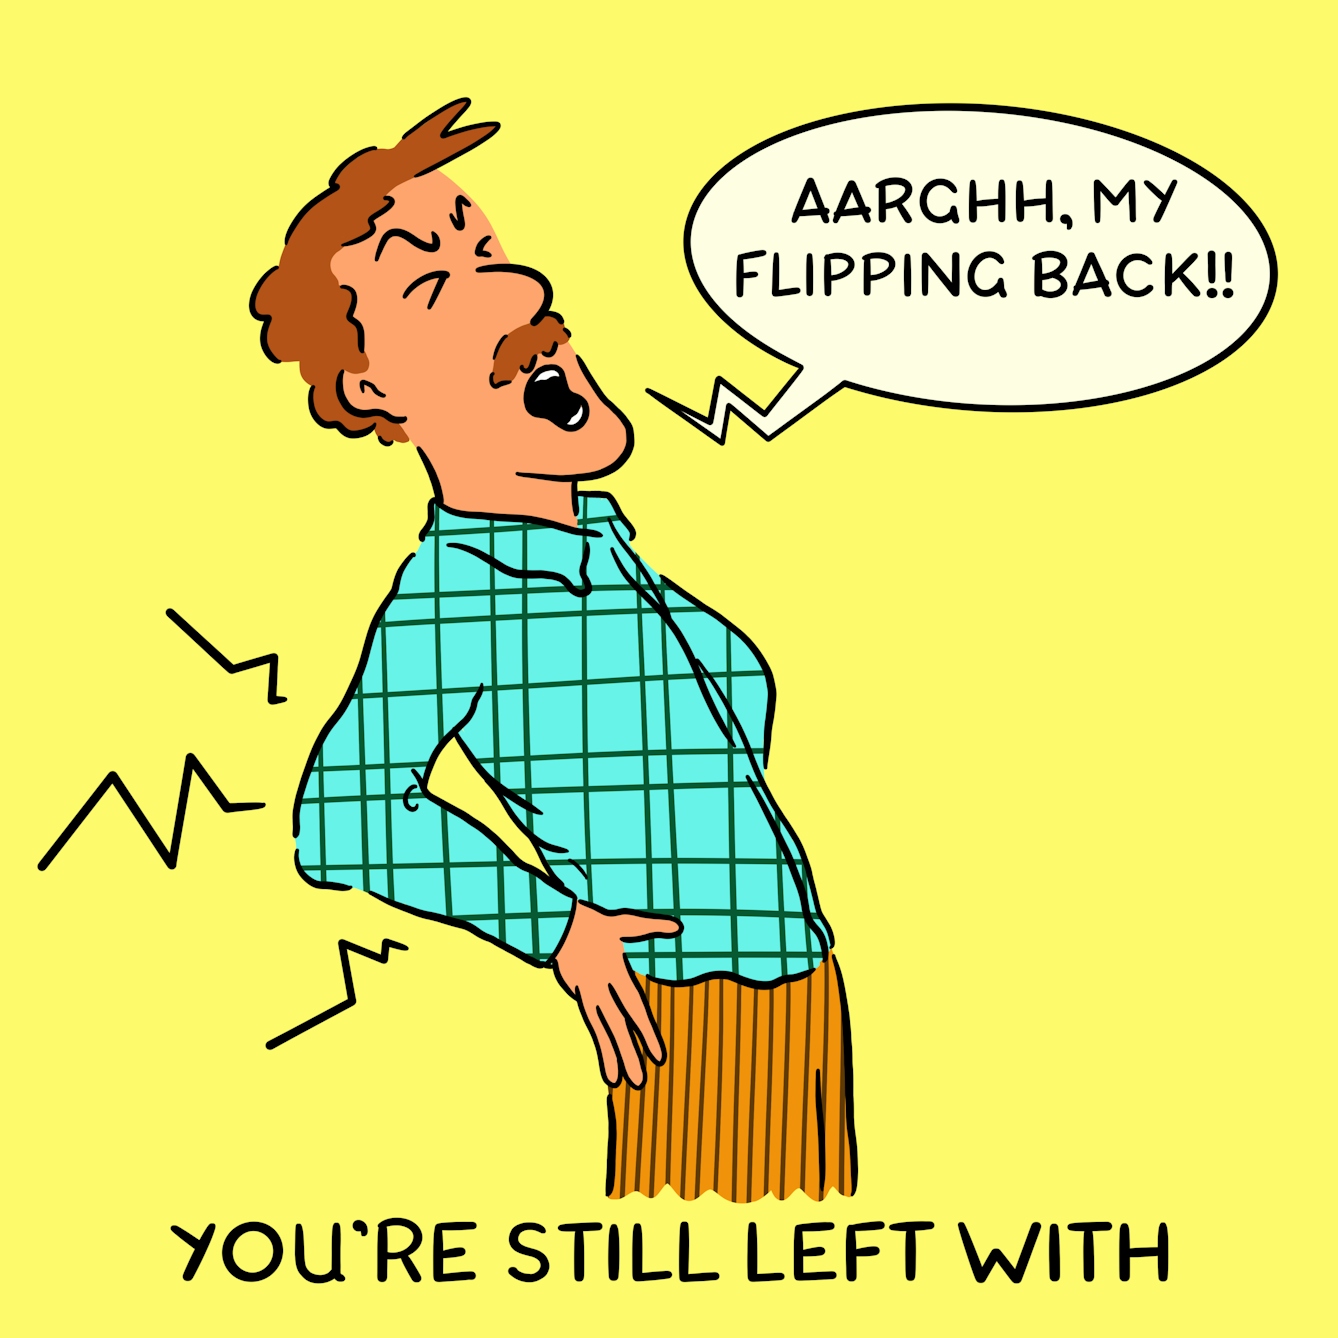 Panel 3 of a four-panel comic drawn digitally: a man with a plaid shirt and moustache clutches his lower back and exclaims "Aarghh, my flipping back!!". The caption text reads "You're still left with"